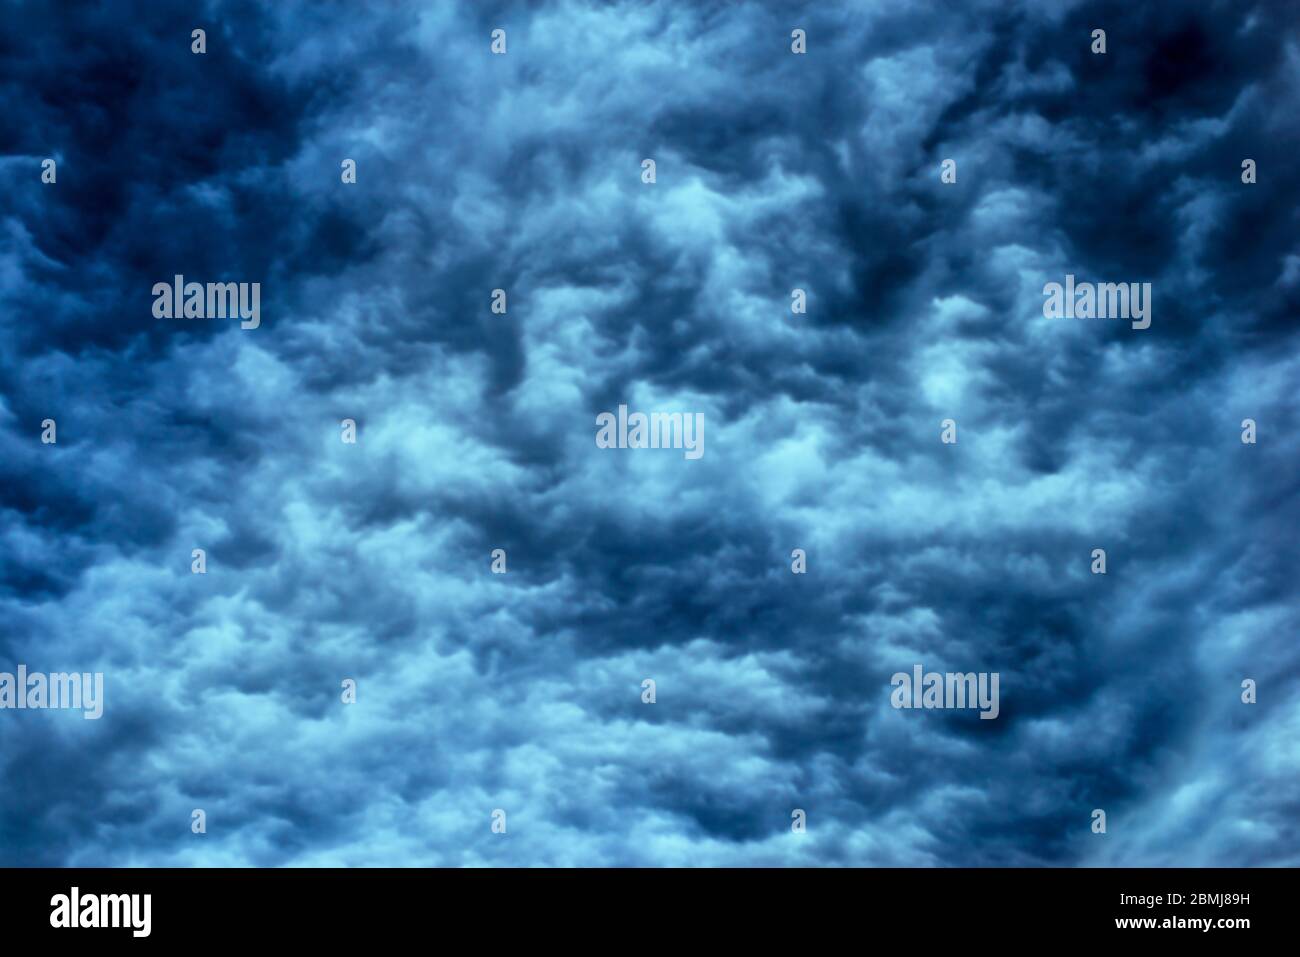 Background Texture of dark ominous storm clouds. Stock Photo